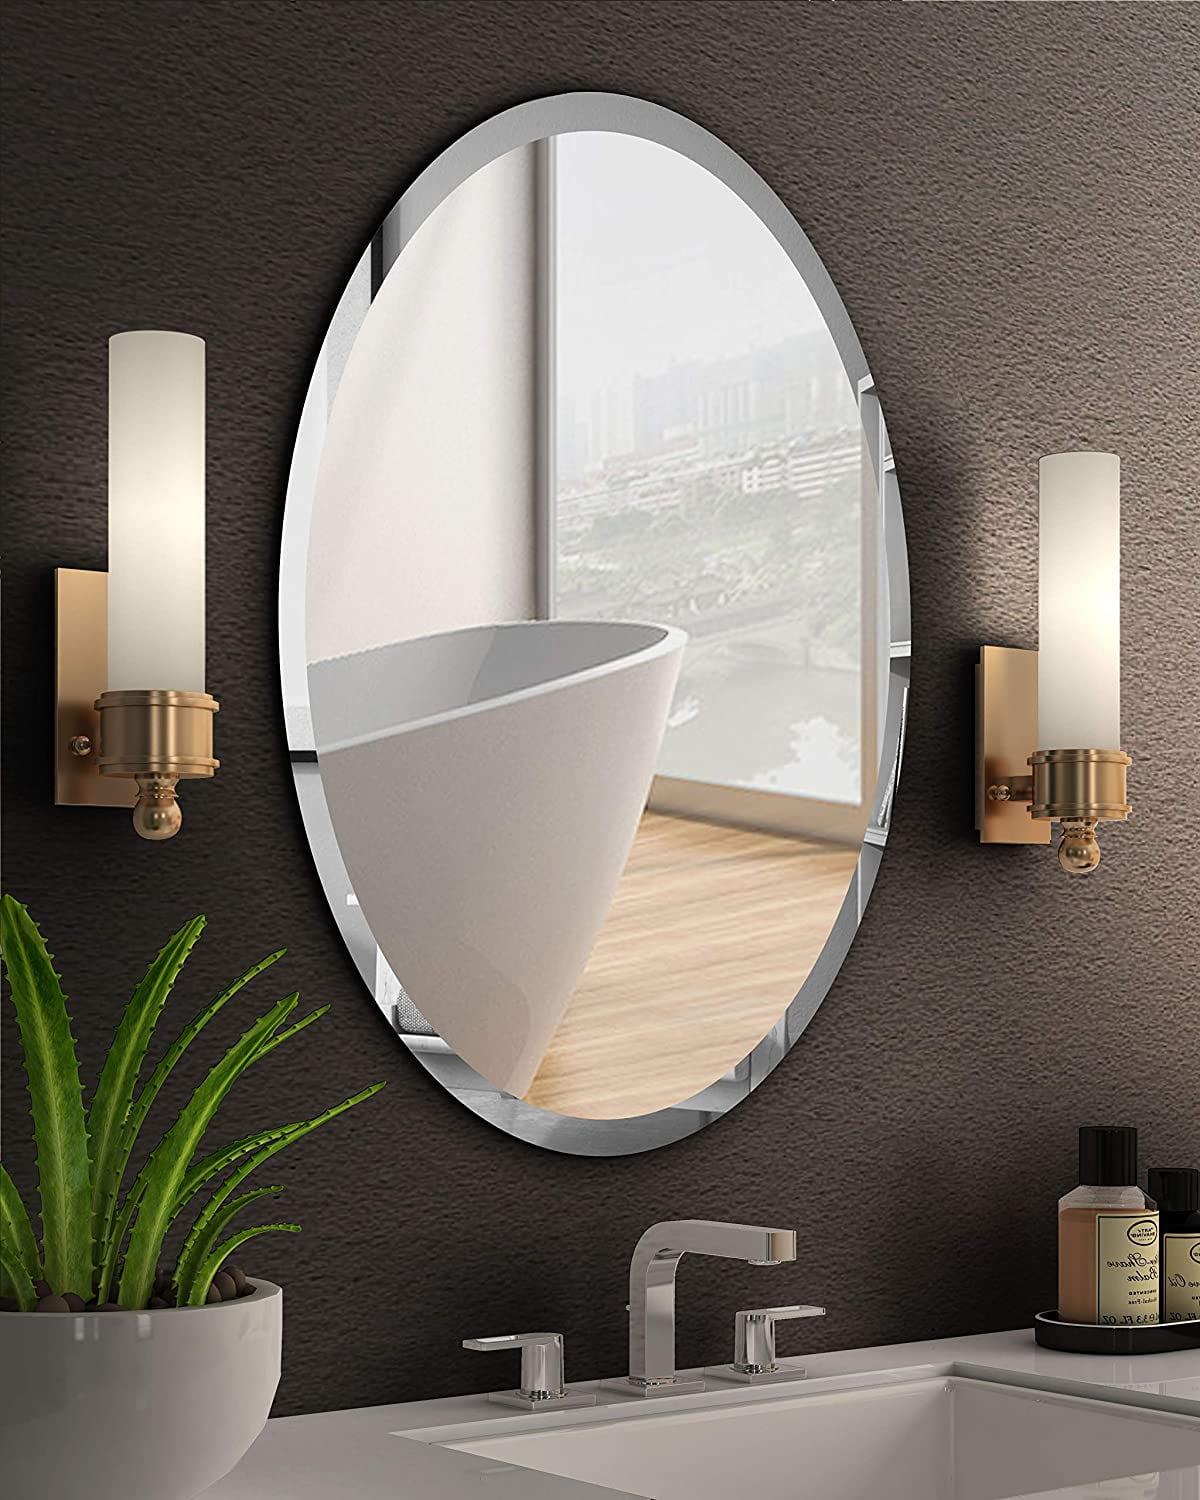 Beveled Polished Frameless Wall Mirror, Large Oval Vanity Mirror For Bathroom